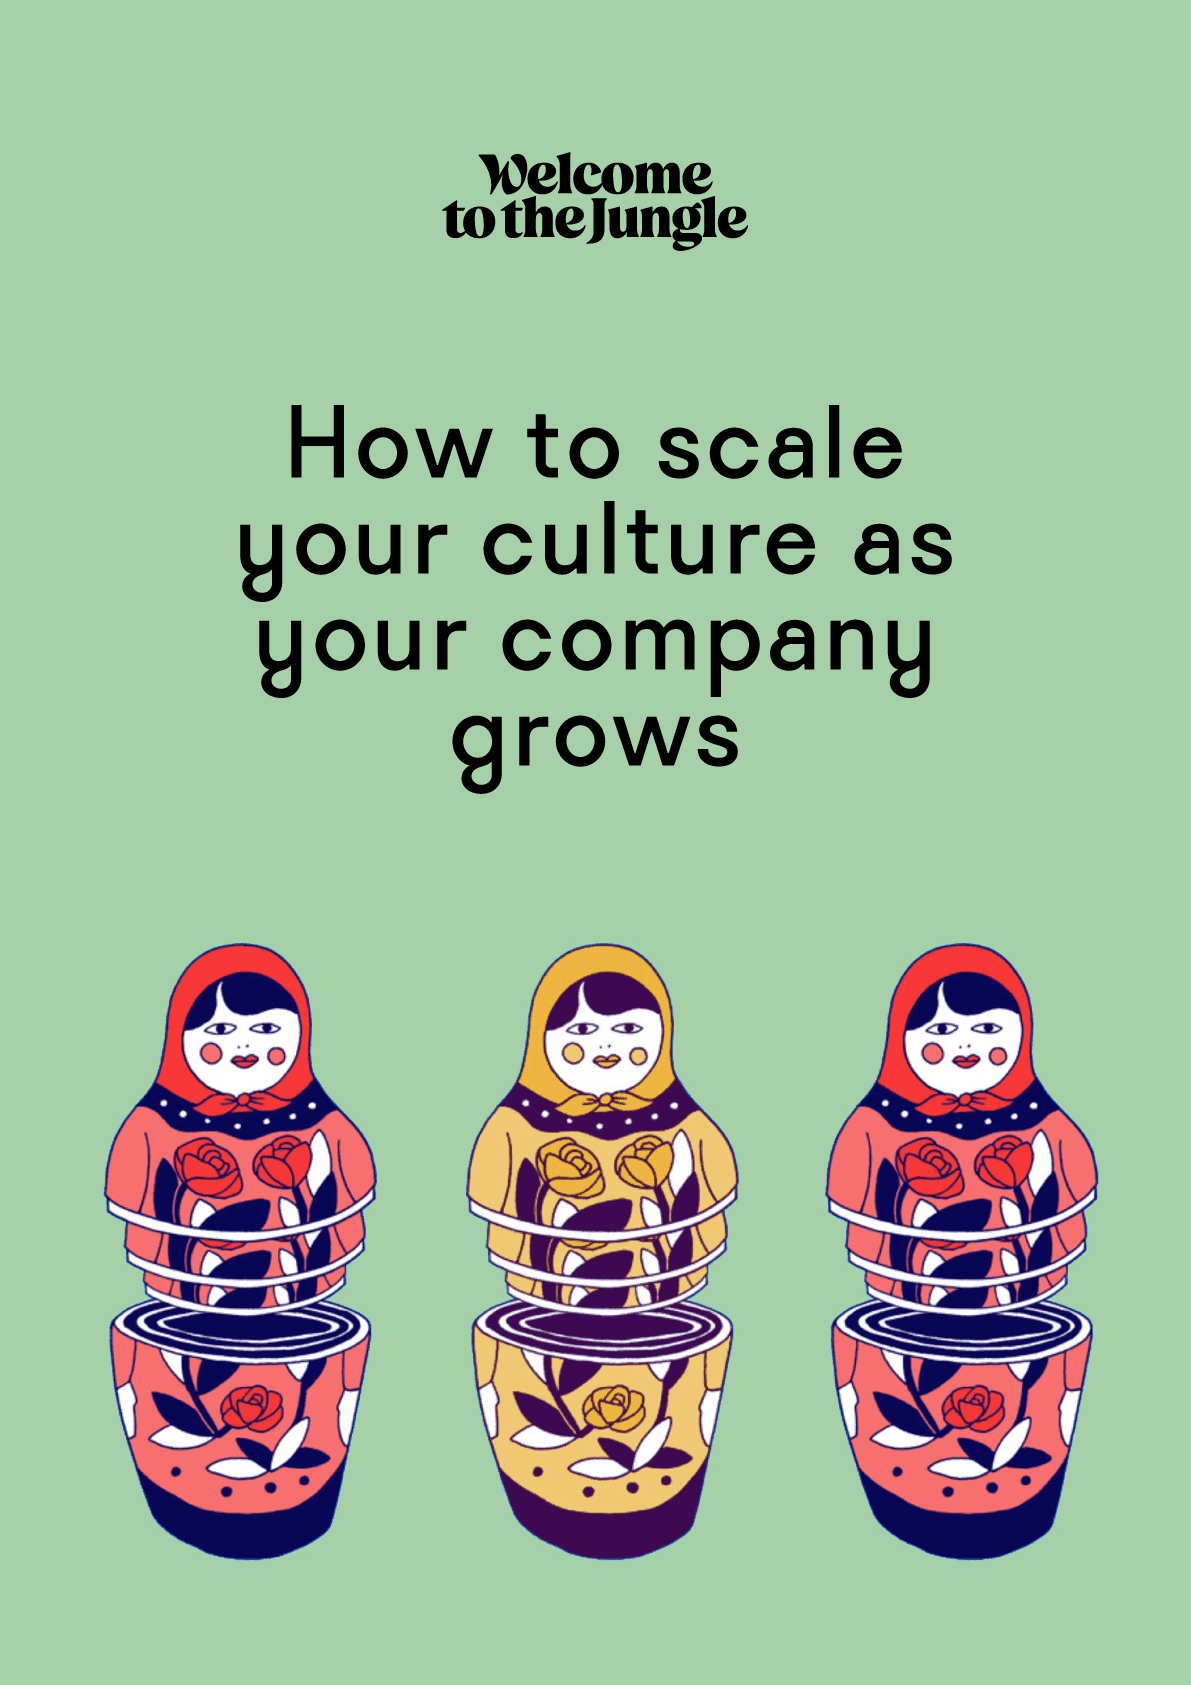 How to scale your culture as your company grows